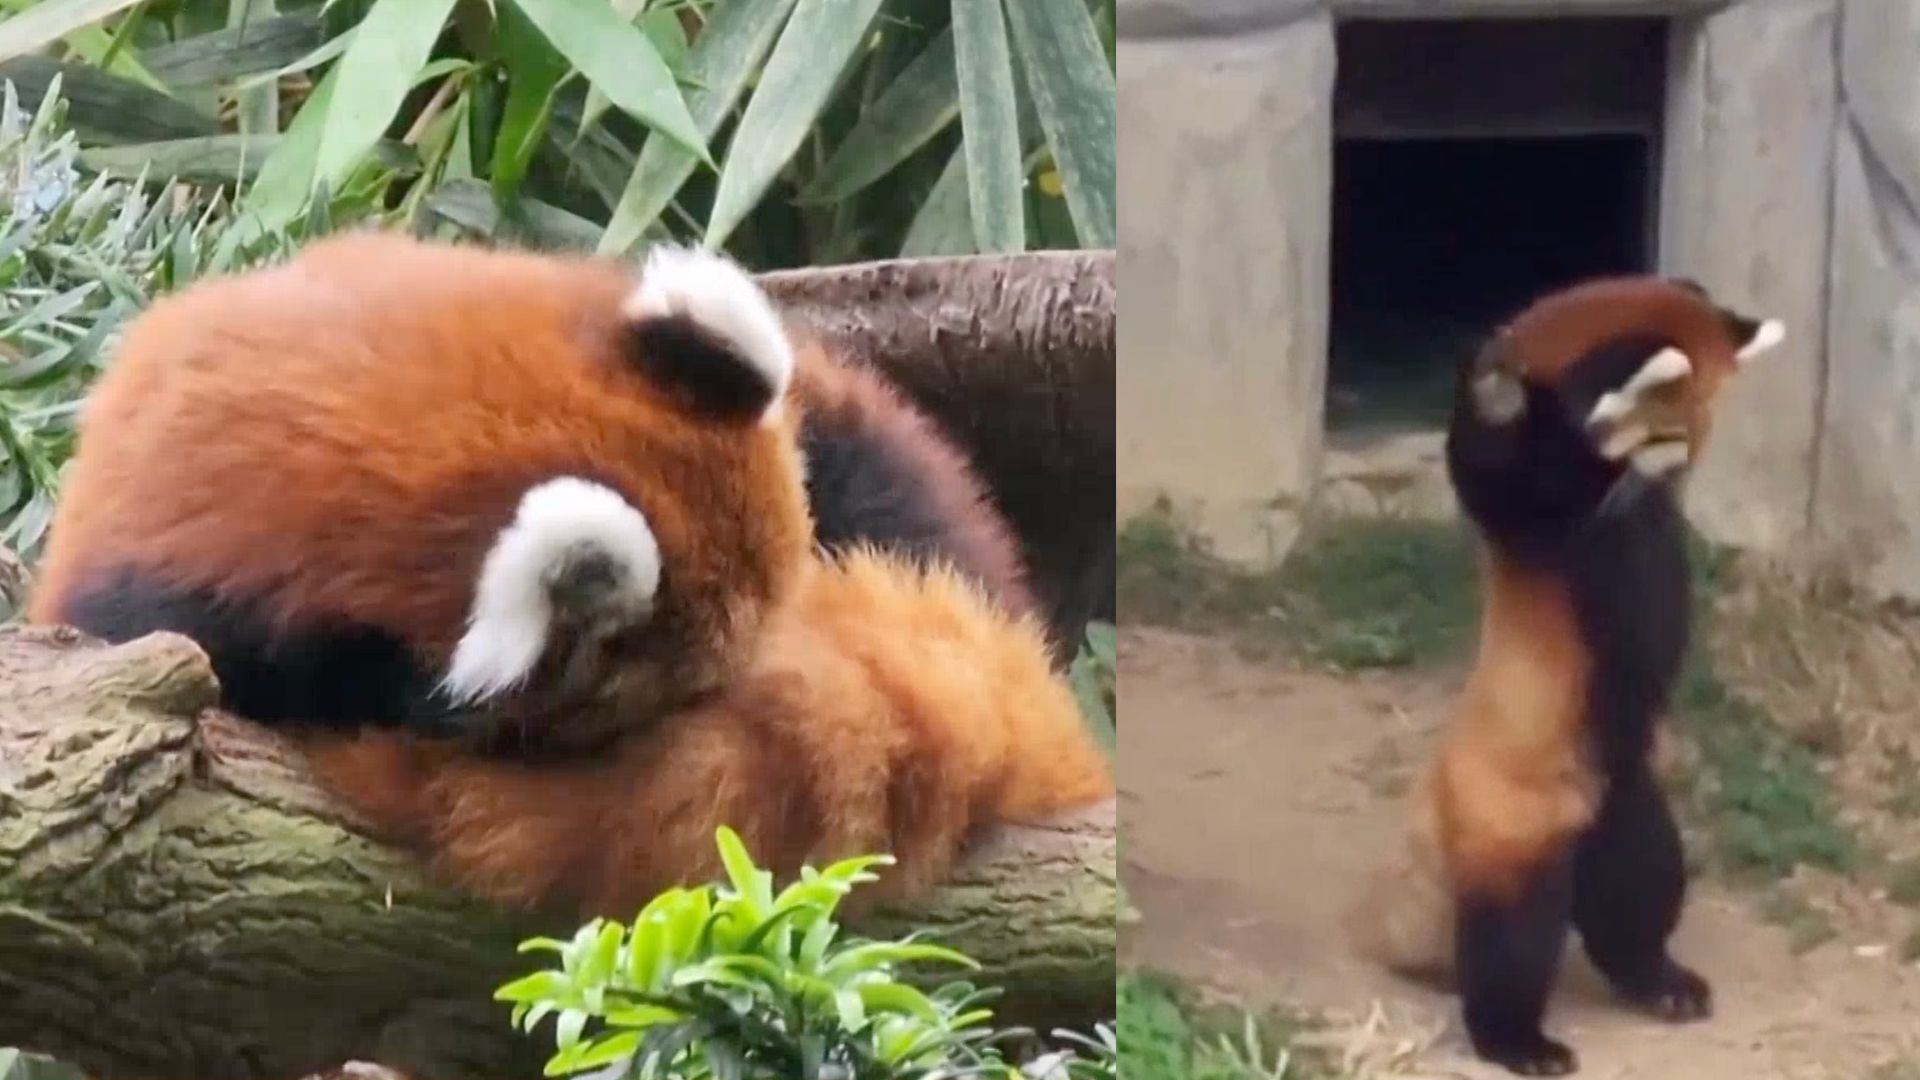 Watch these adorable and silly little Red Pandas